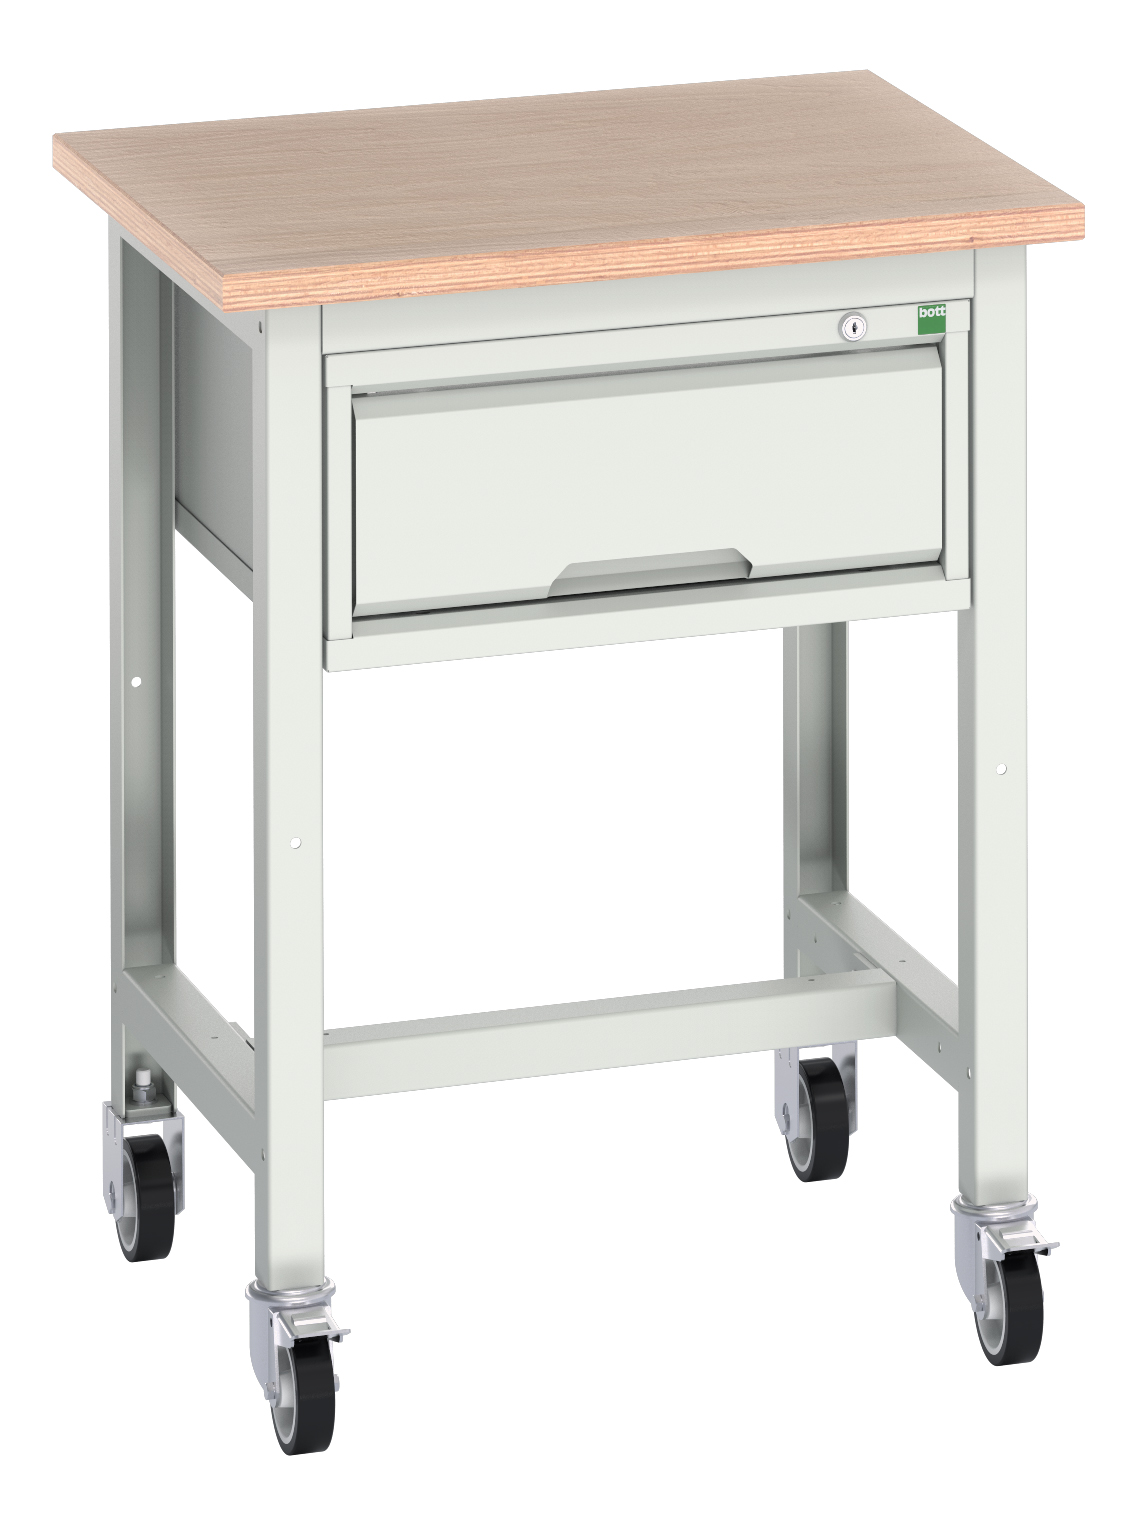 Bott Verso Mobile Workstand With 1 Drawer Cabinet - 16922200.16